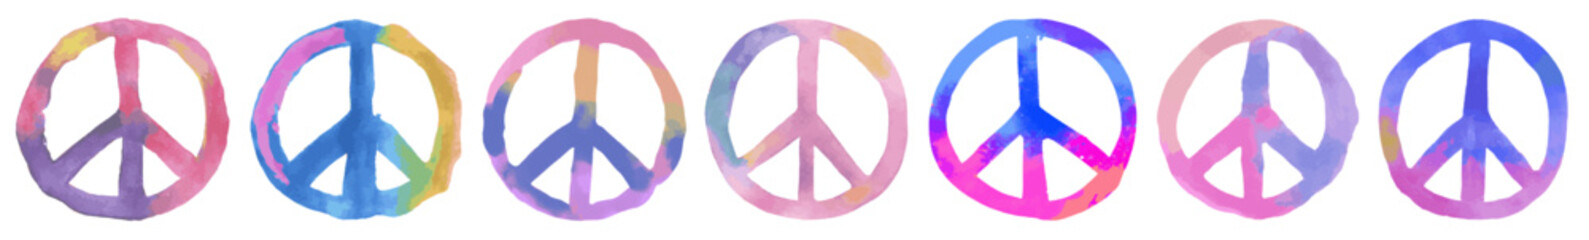 Peace Sign Watercolor Icon Set | Peace Vector Illustration Logo | Colorful Peace Signs | Colored Isolated Collection